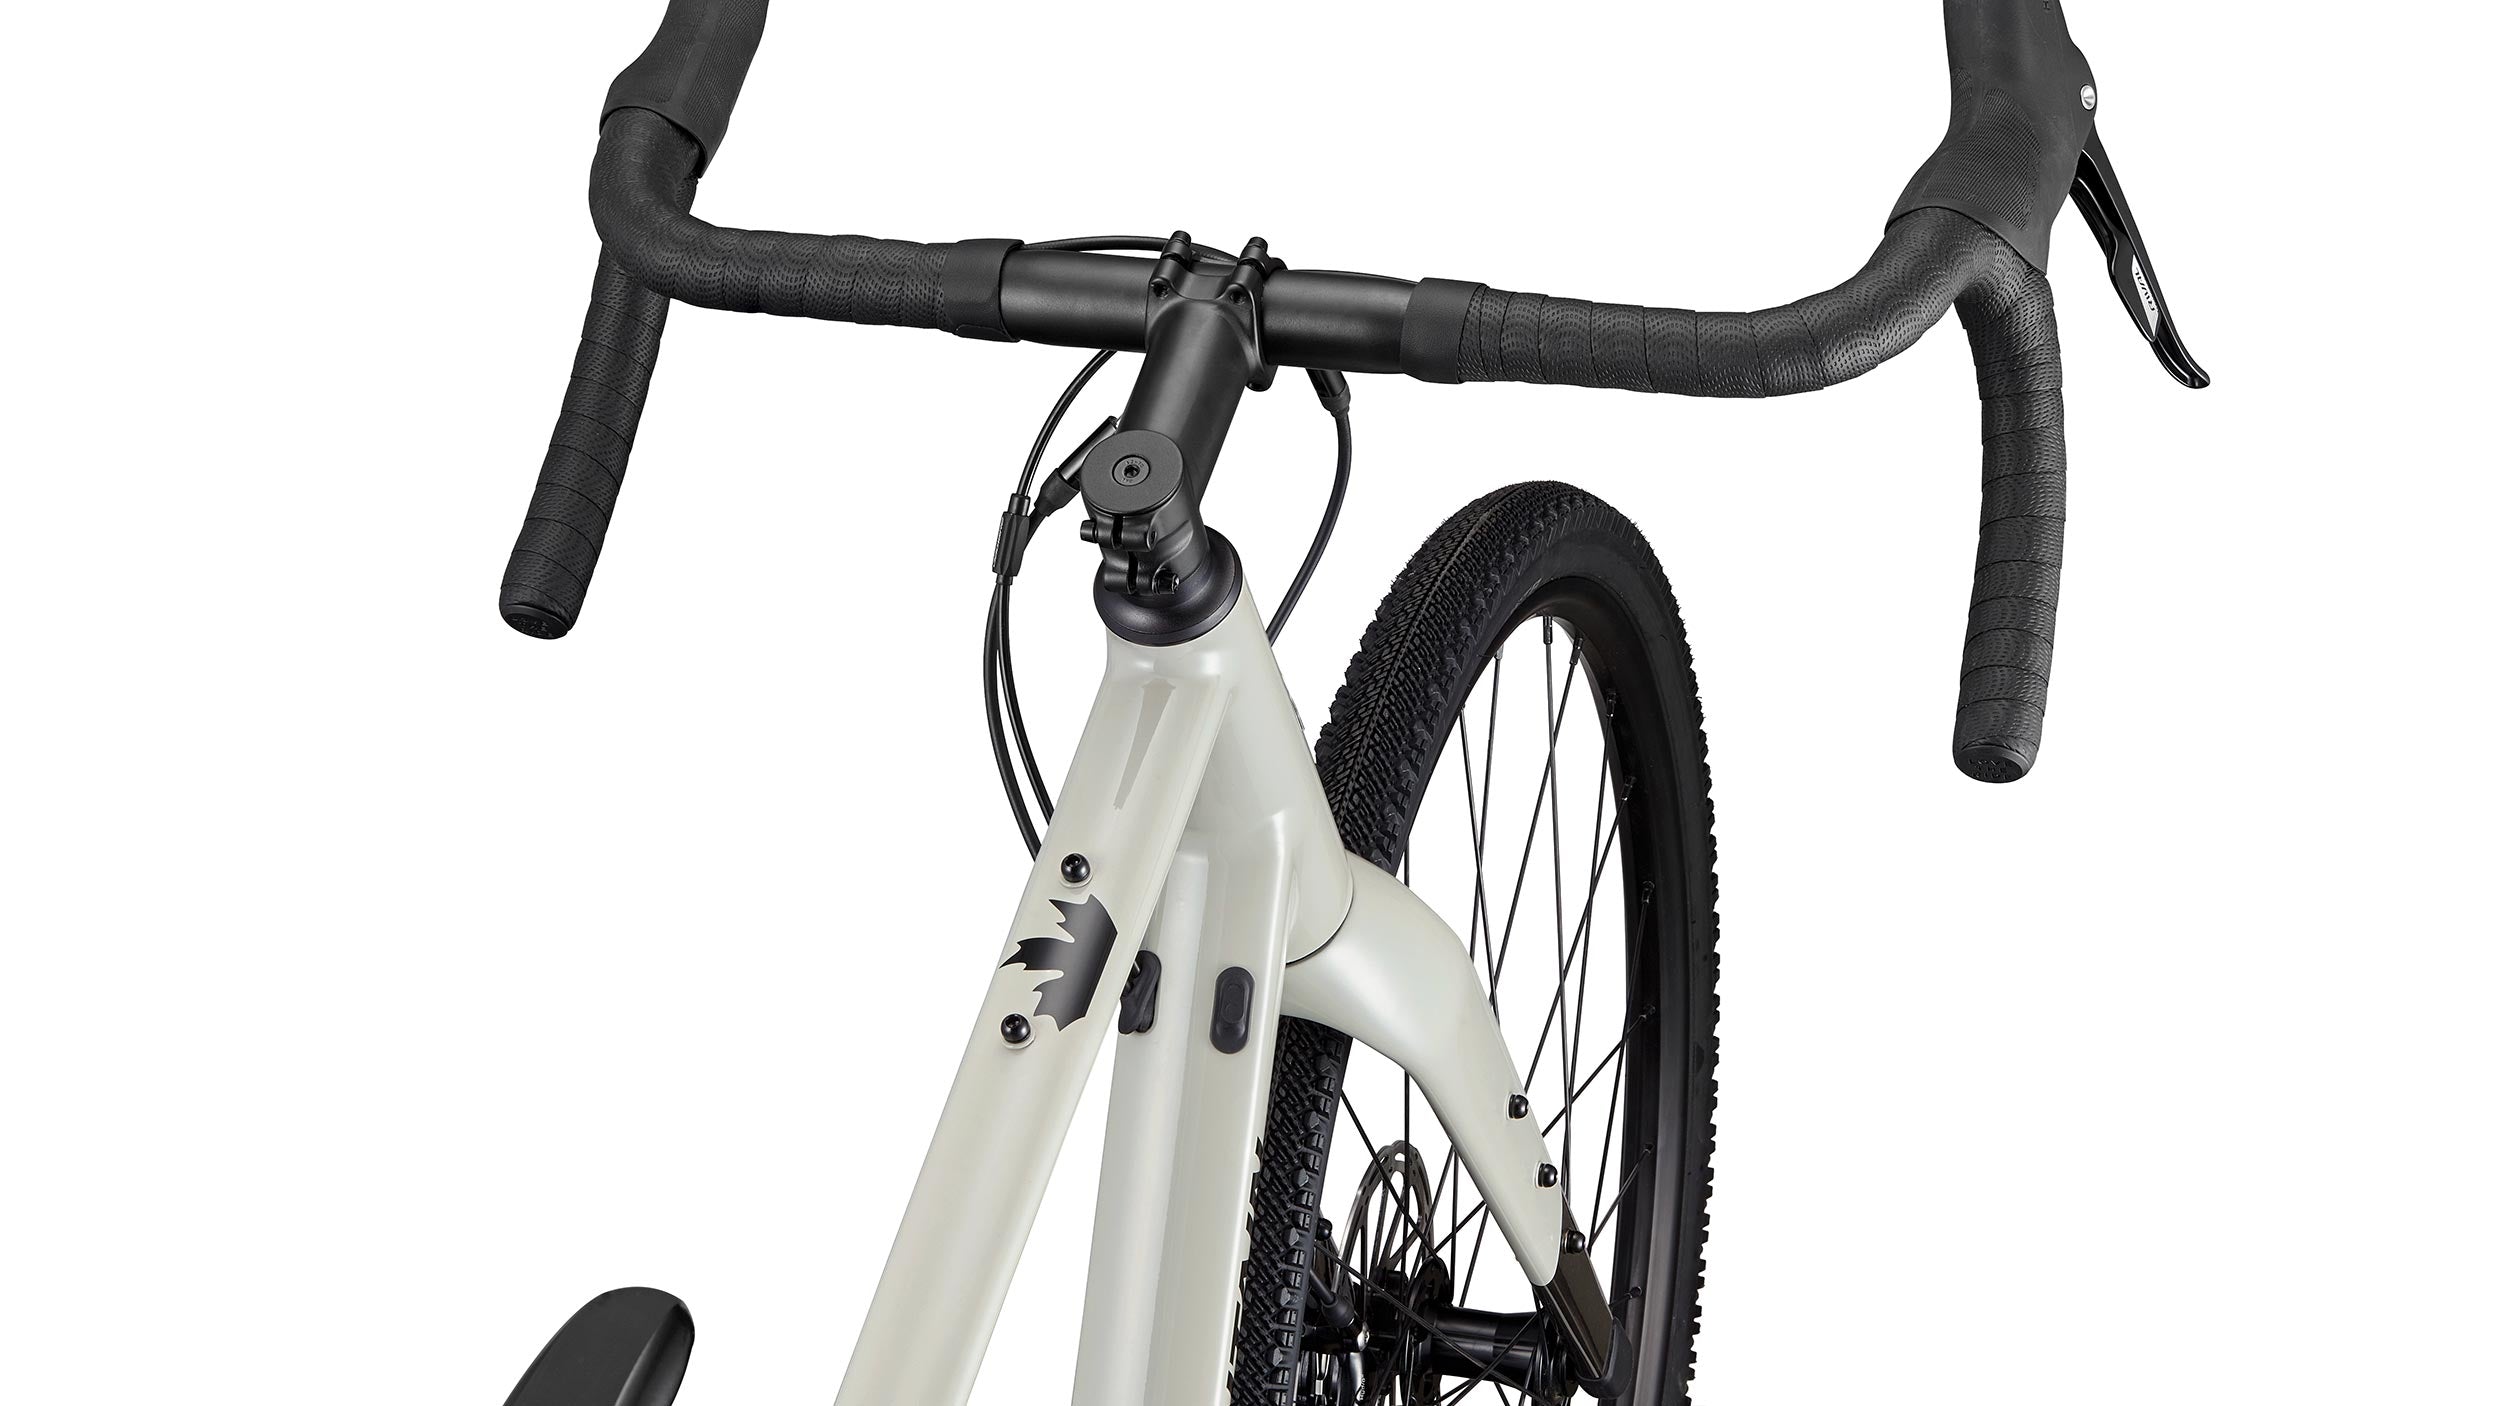 _caption_The Solo offers plenty of frame and fork mounts to secure storage for all your essentials on gravel rides, freeing up space on your handlebars and streamlining your bike setup.